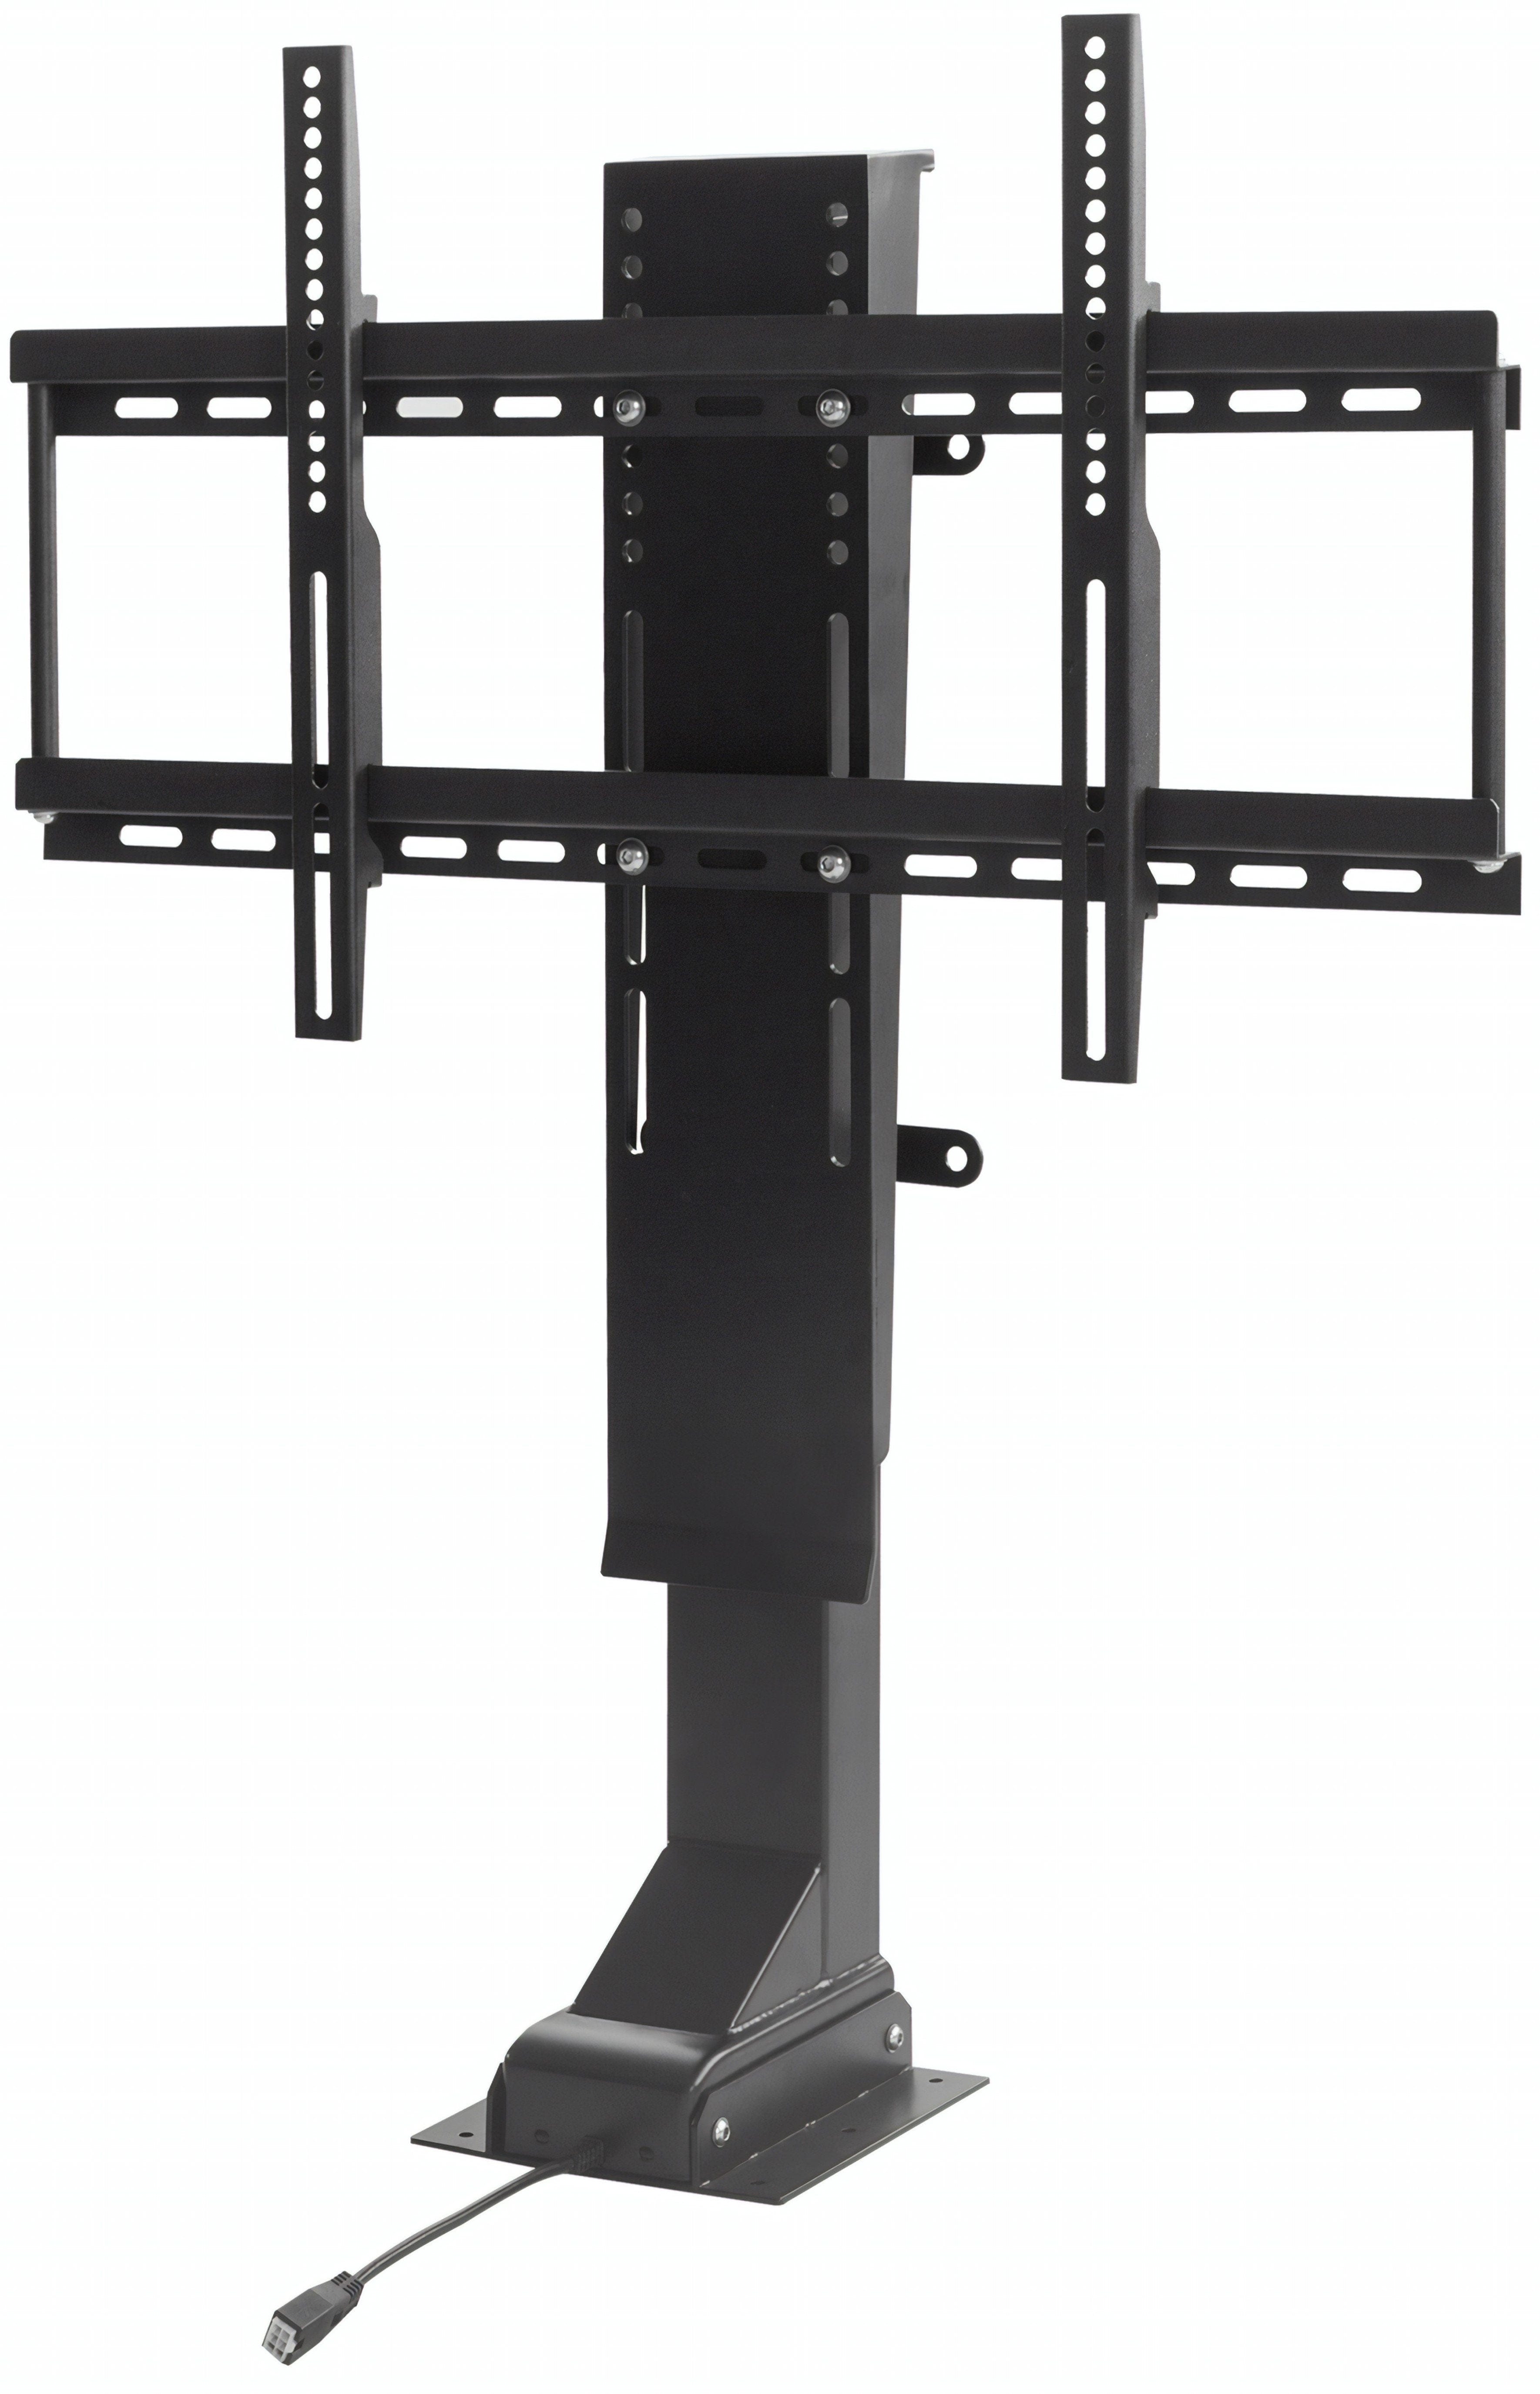 SRV 33900 Pro TV Lift Mechanism Touchstone Home Products, Inc with a white background.